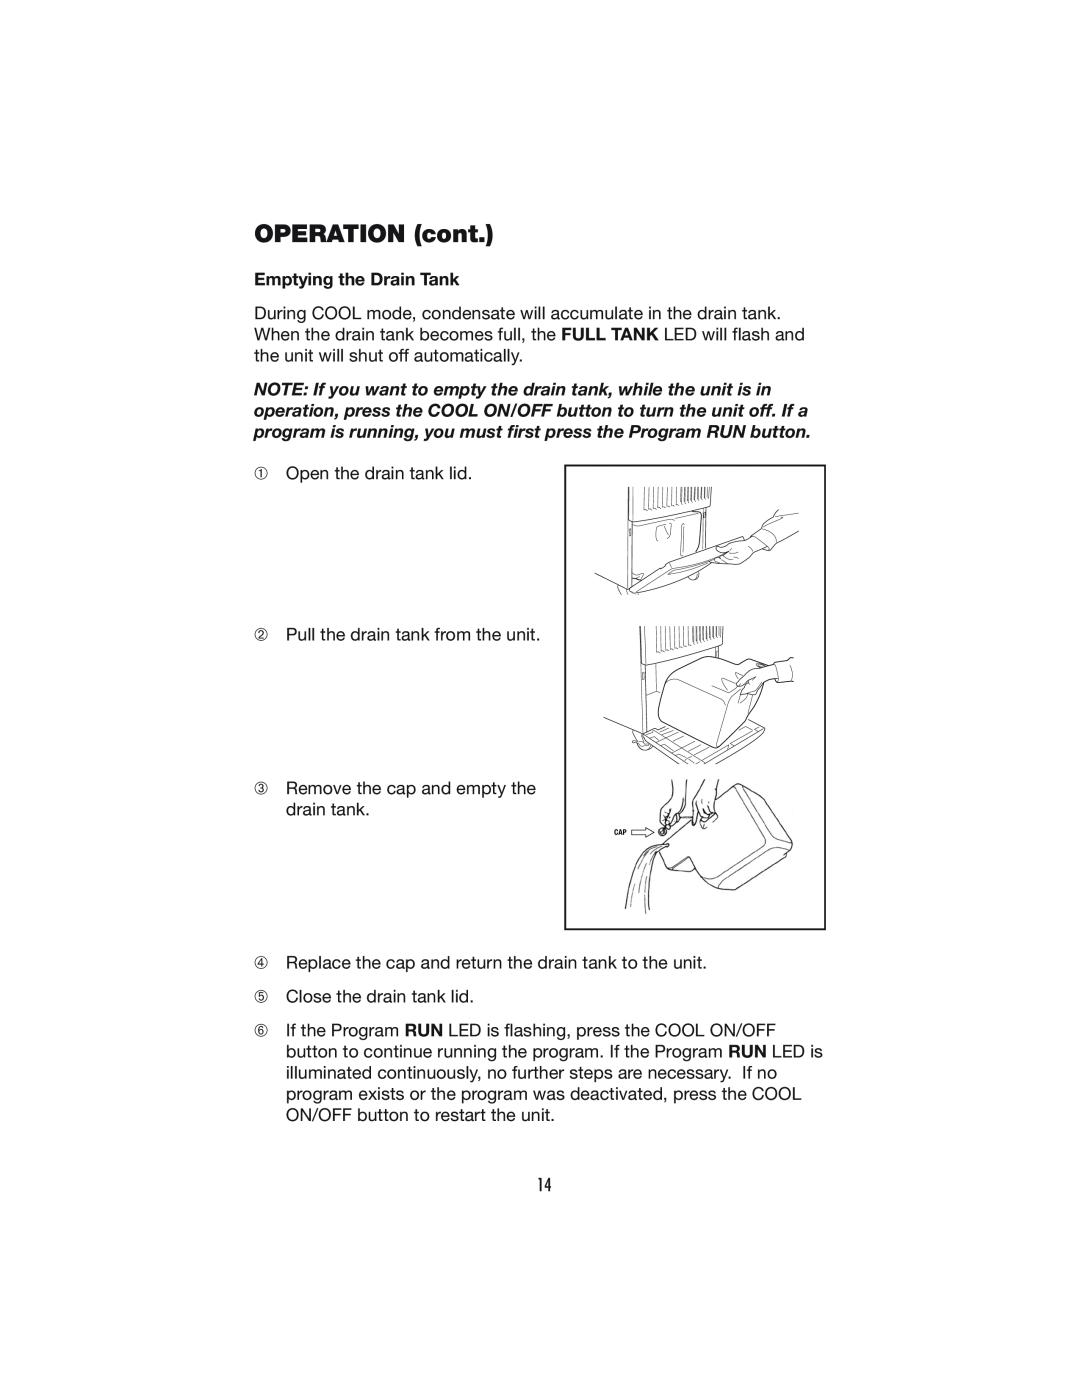 Denso PRO 18 operation manual Emptying the Drain Tank, OPERATION cont 